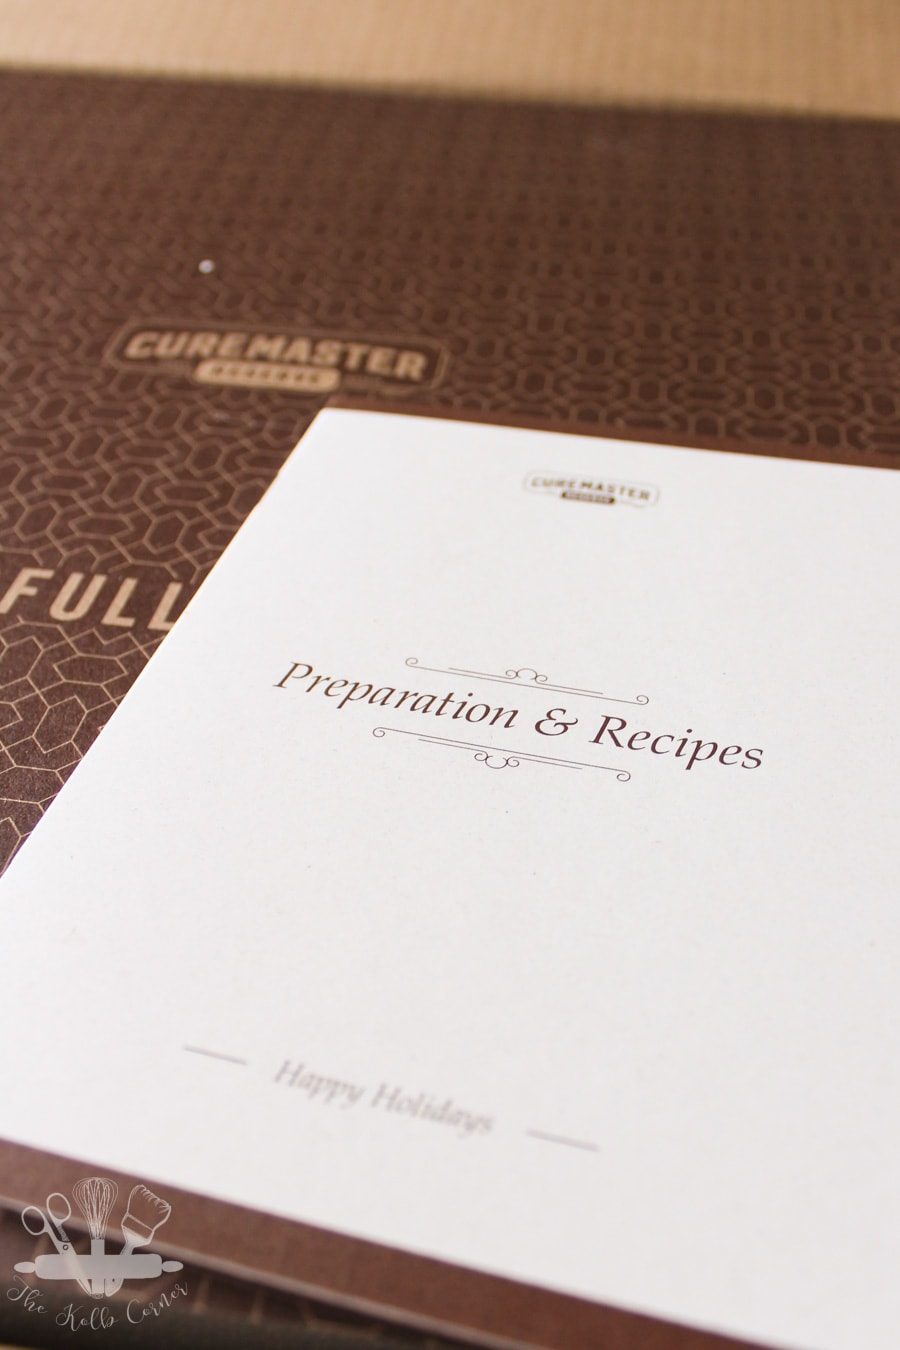 Curemaster reserve's preparation and recipes booklet